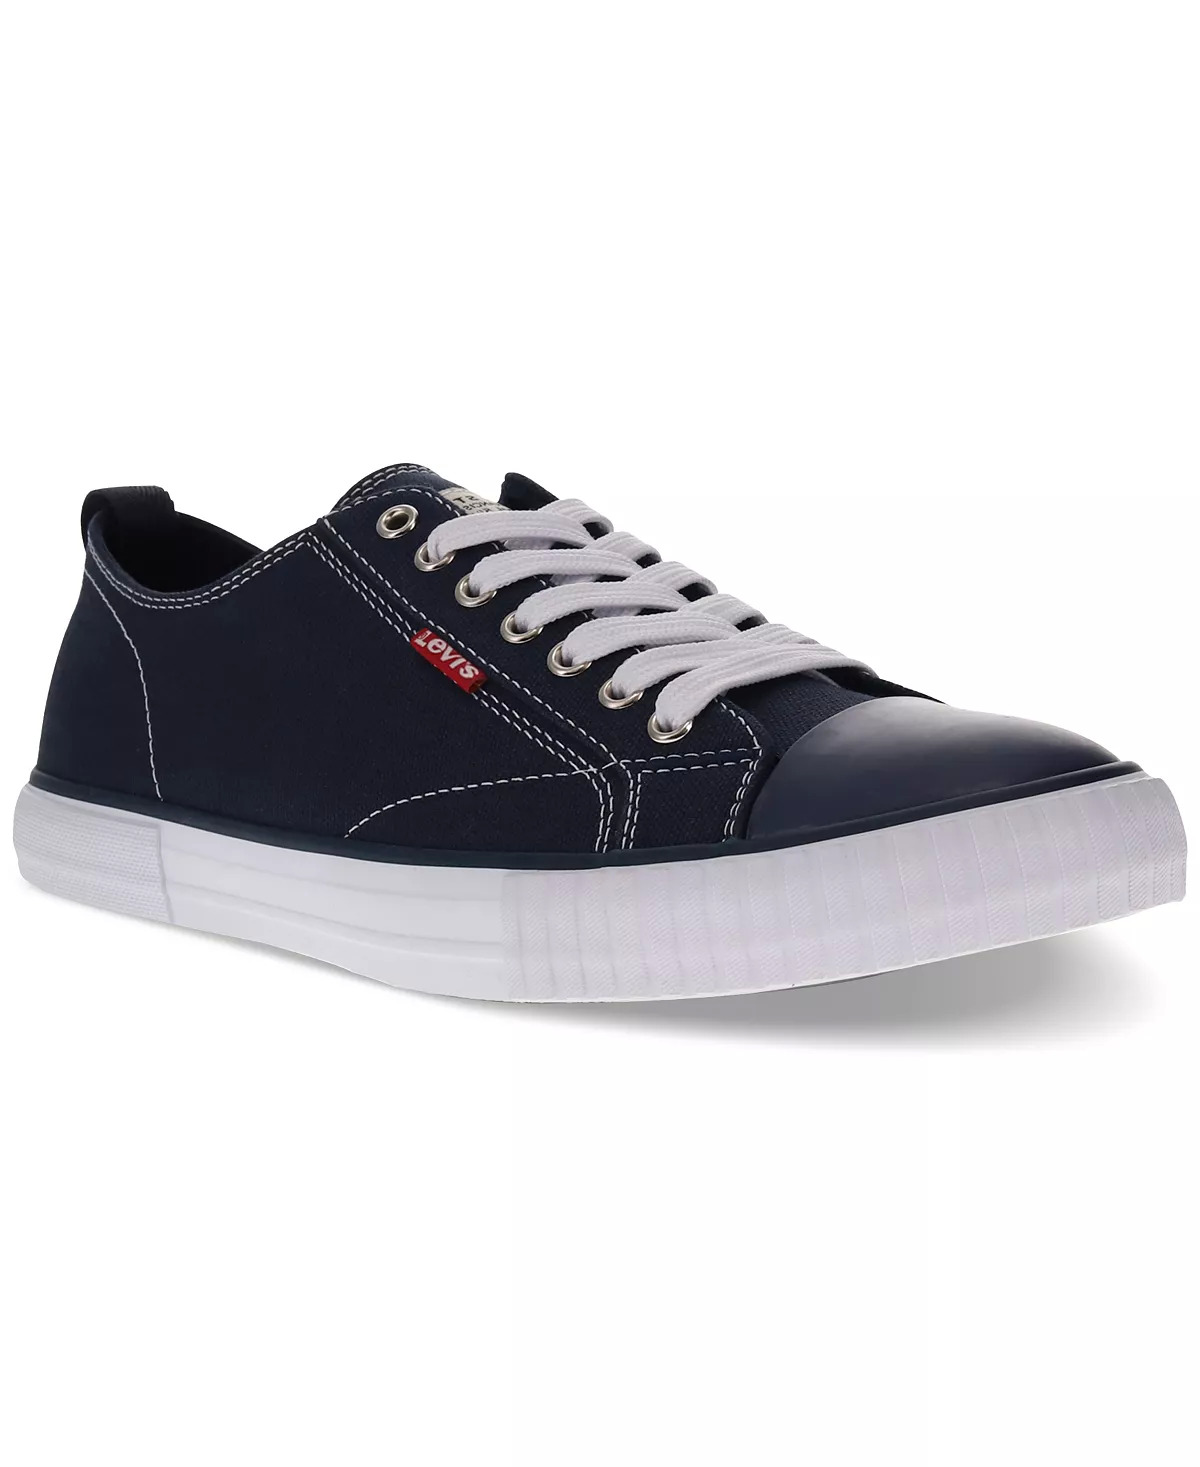 Men's Sneakers & Shoes: Levi's Men's Anikin Lace-Up Sneakers or Anikin Canvas Sneaker $17.50 & More + Free Store Pickup at Macy's or F/S on $25+